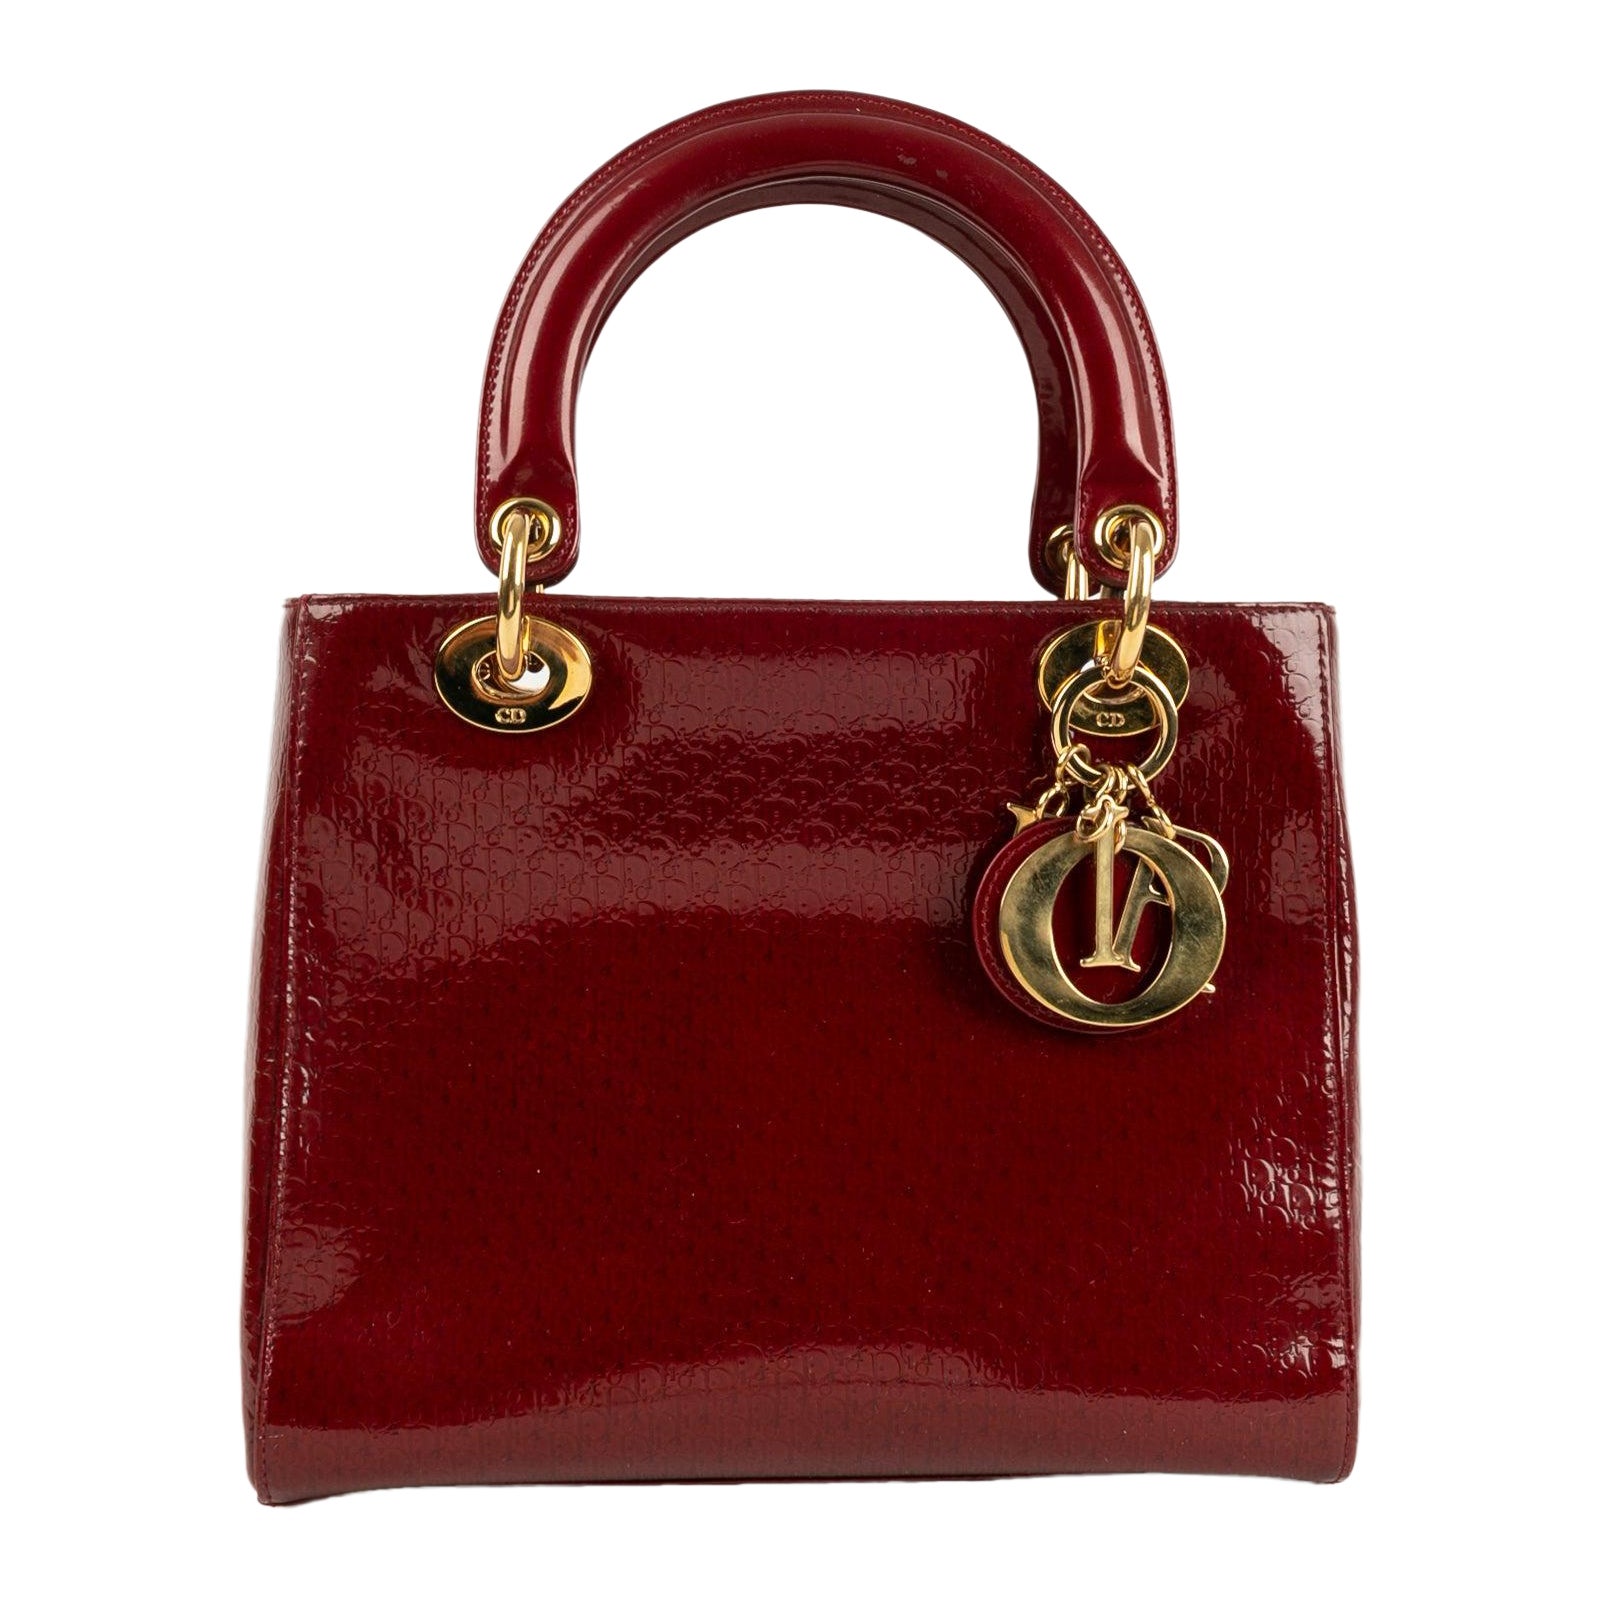 Lady Dior Red Patent Leather Handbag For Sale